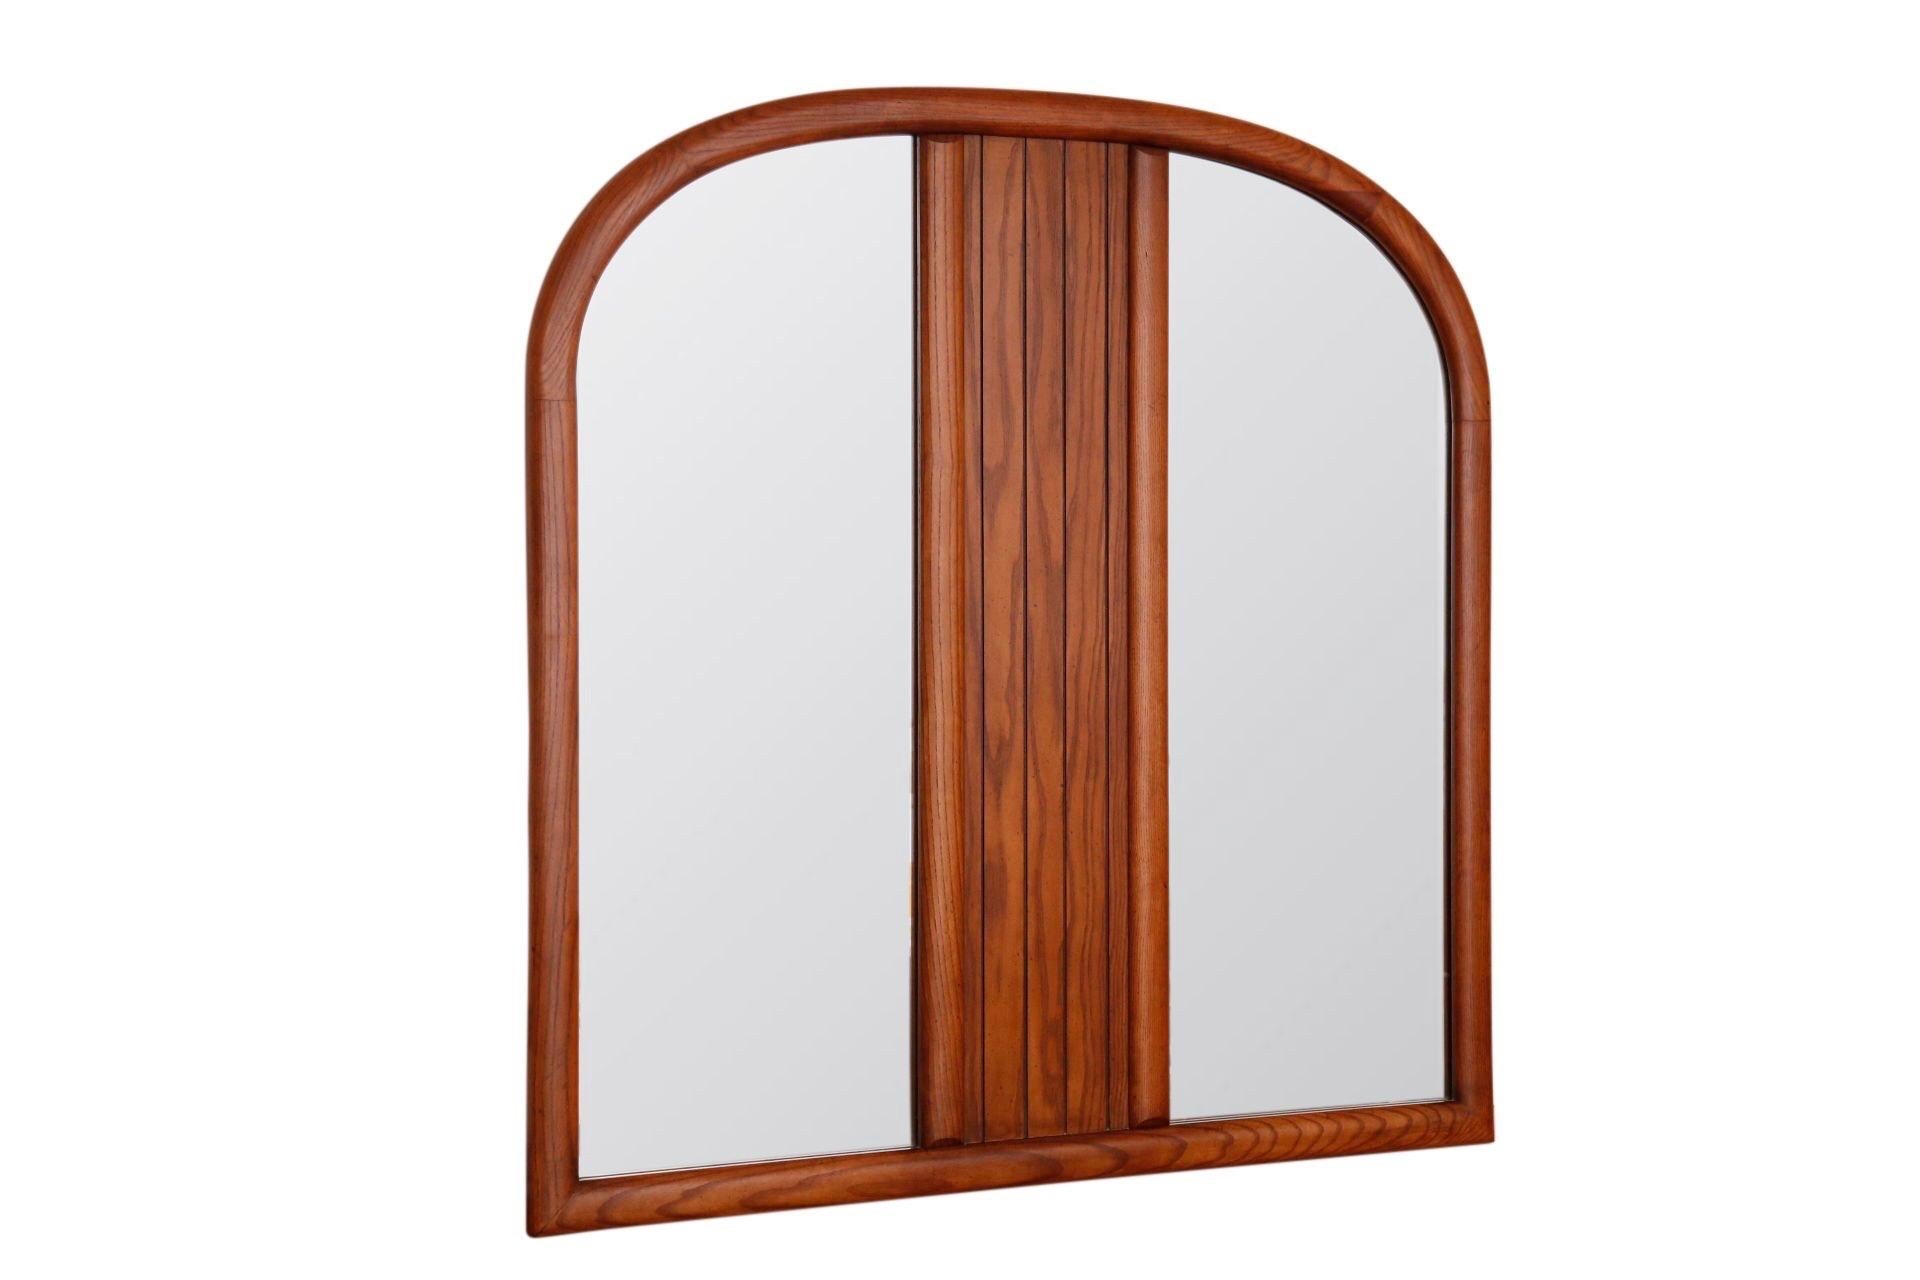 A mid century arched wall mirror made by Stanley Furniture. A wooden frame in oak is richly grained with a central beveled panel.